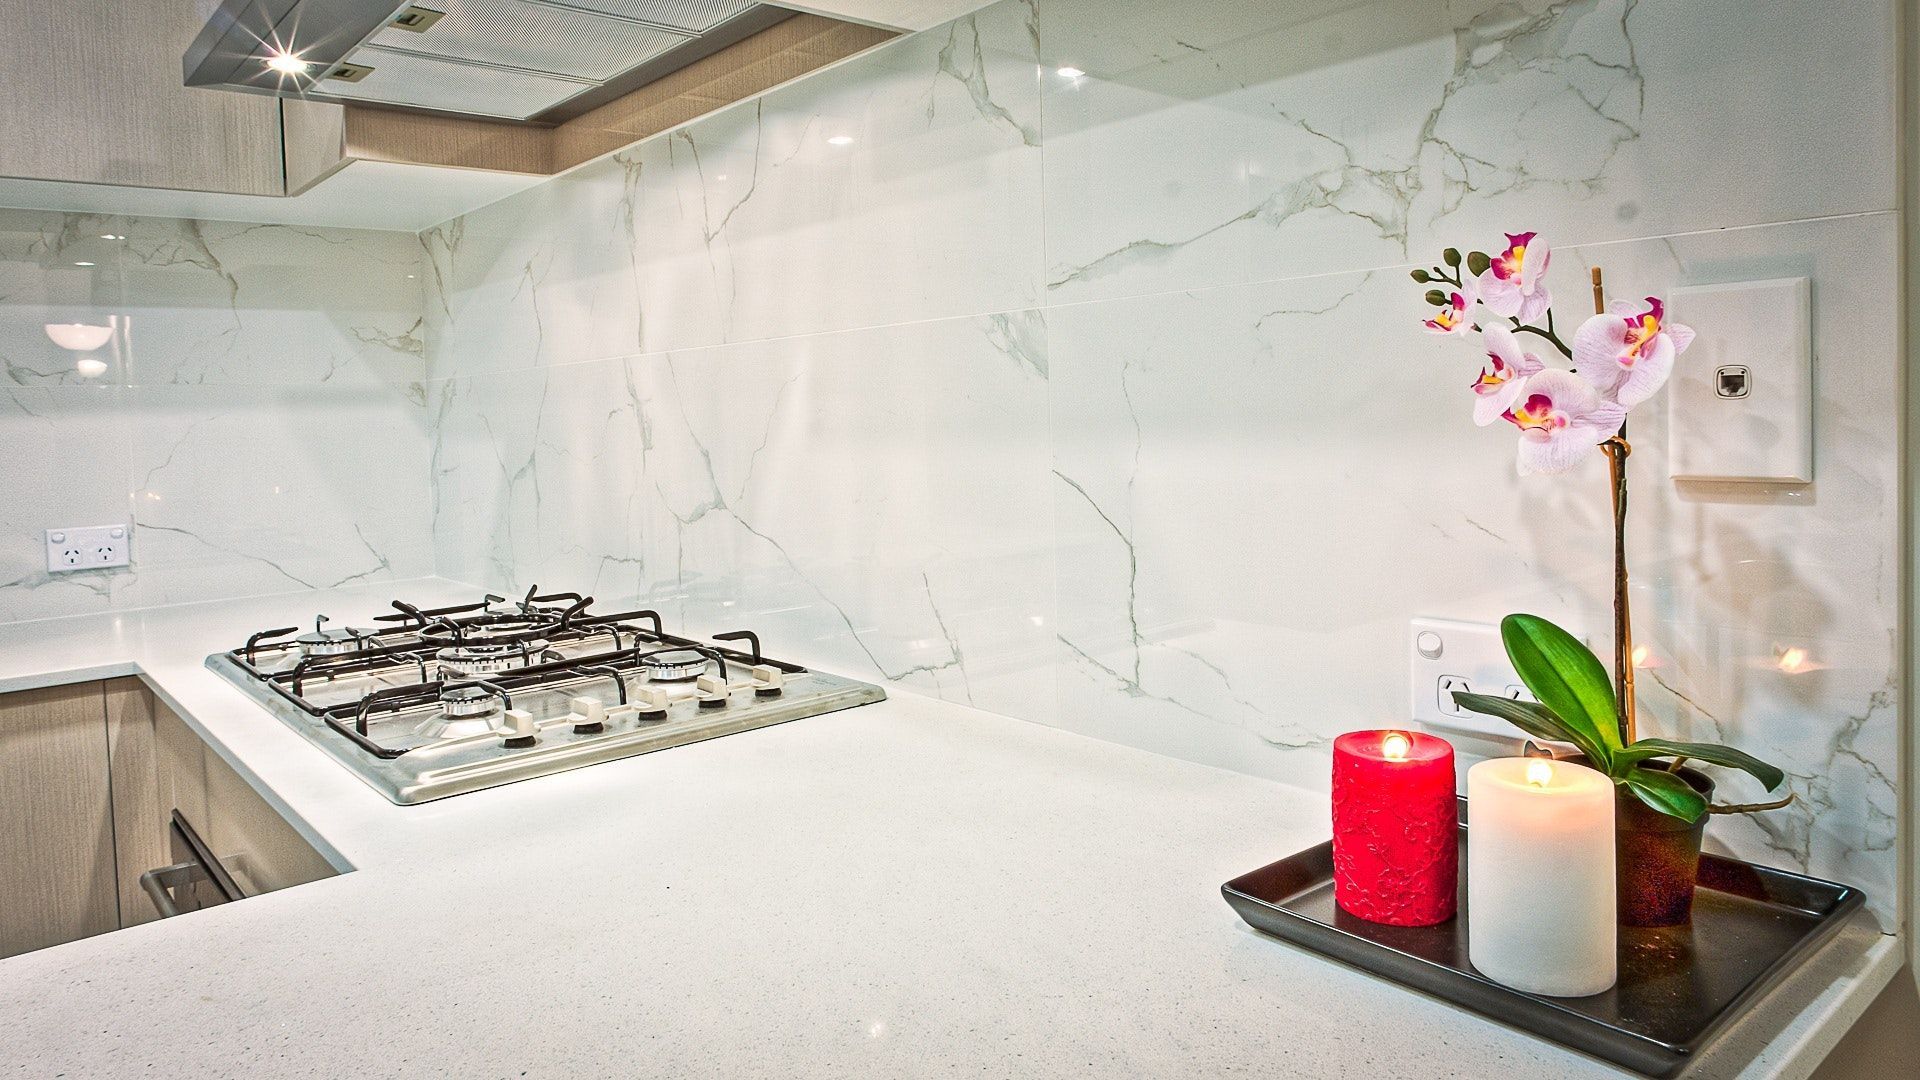 A modern kitchen with a luxurious marble tile backsplash.